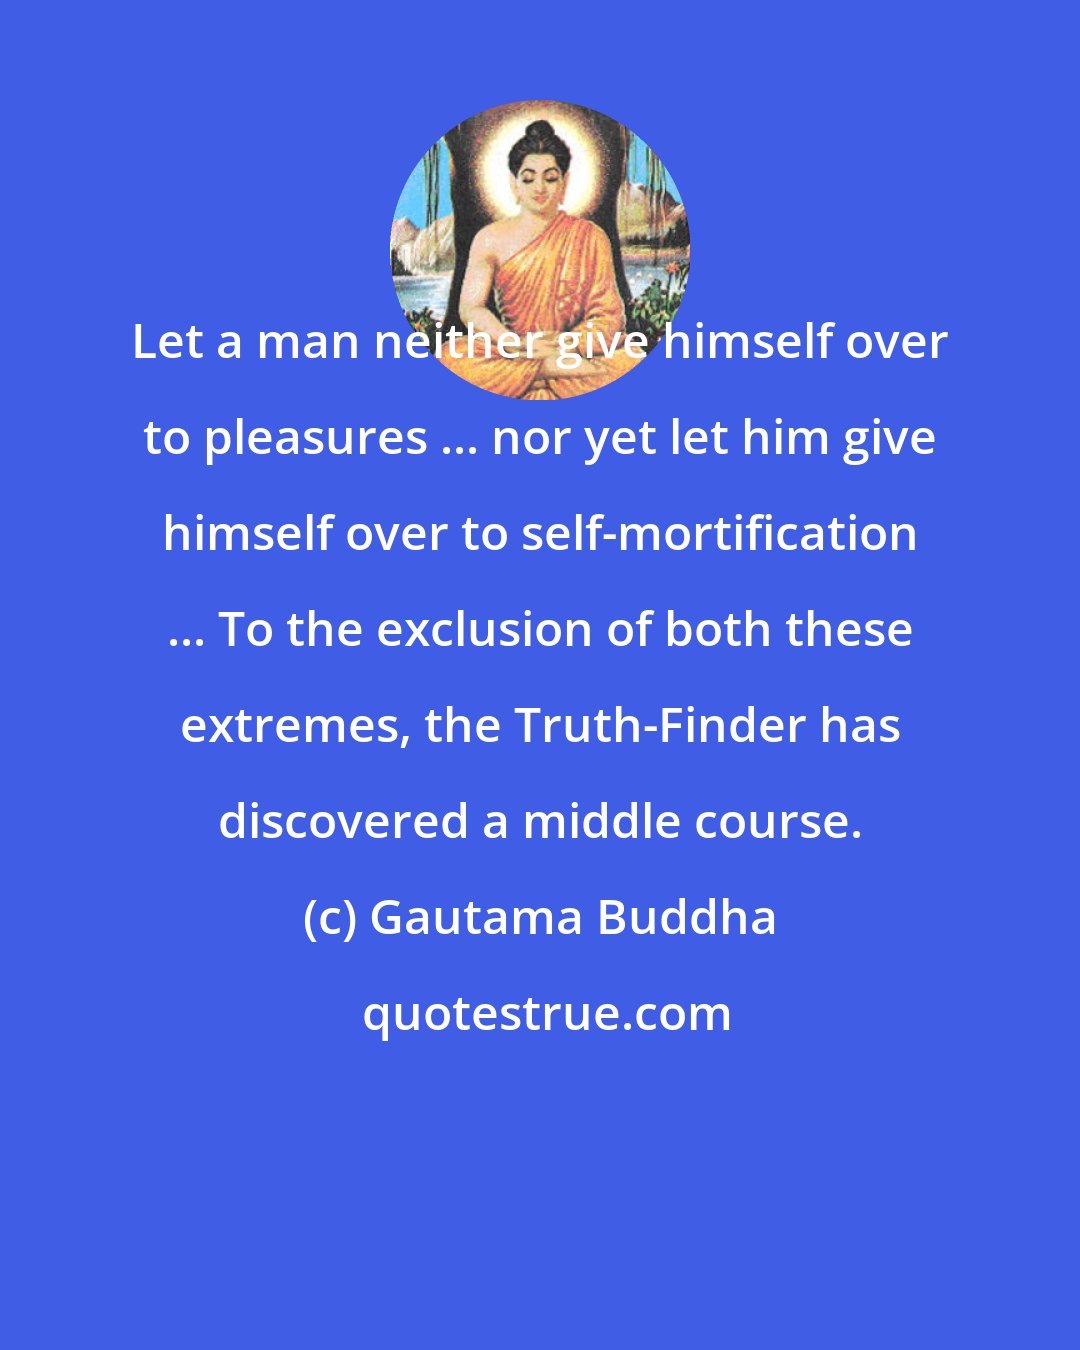 Gautama Buddha: Let a man neither give himself over to pleasures ... nor yet let him give himself over to self-mortification ... To the exclusion of both these extremes, the Truth-Finder has discovered a middle course.